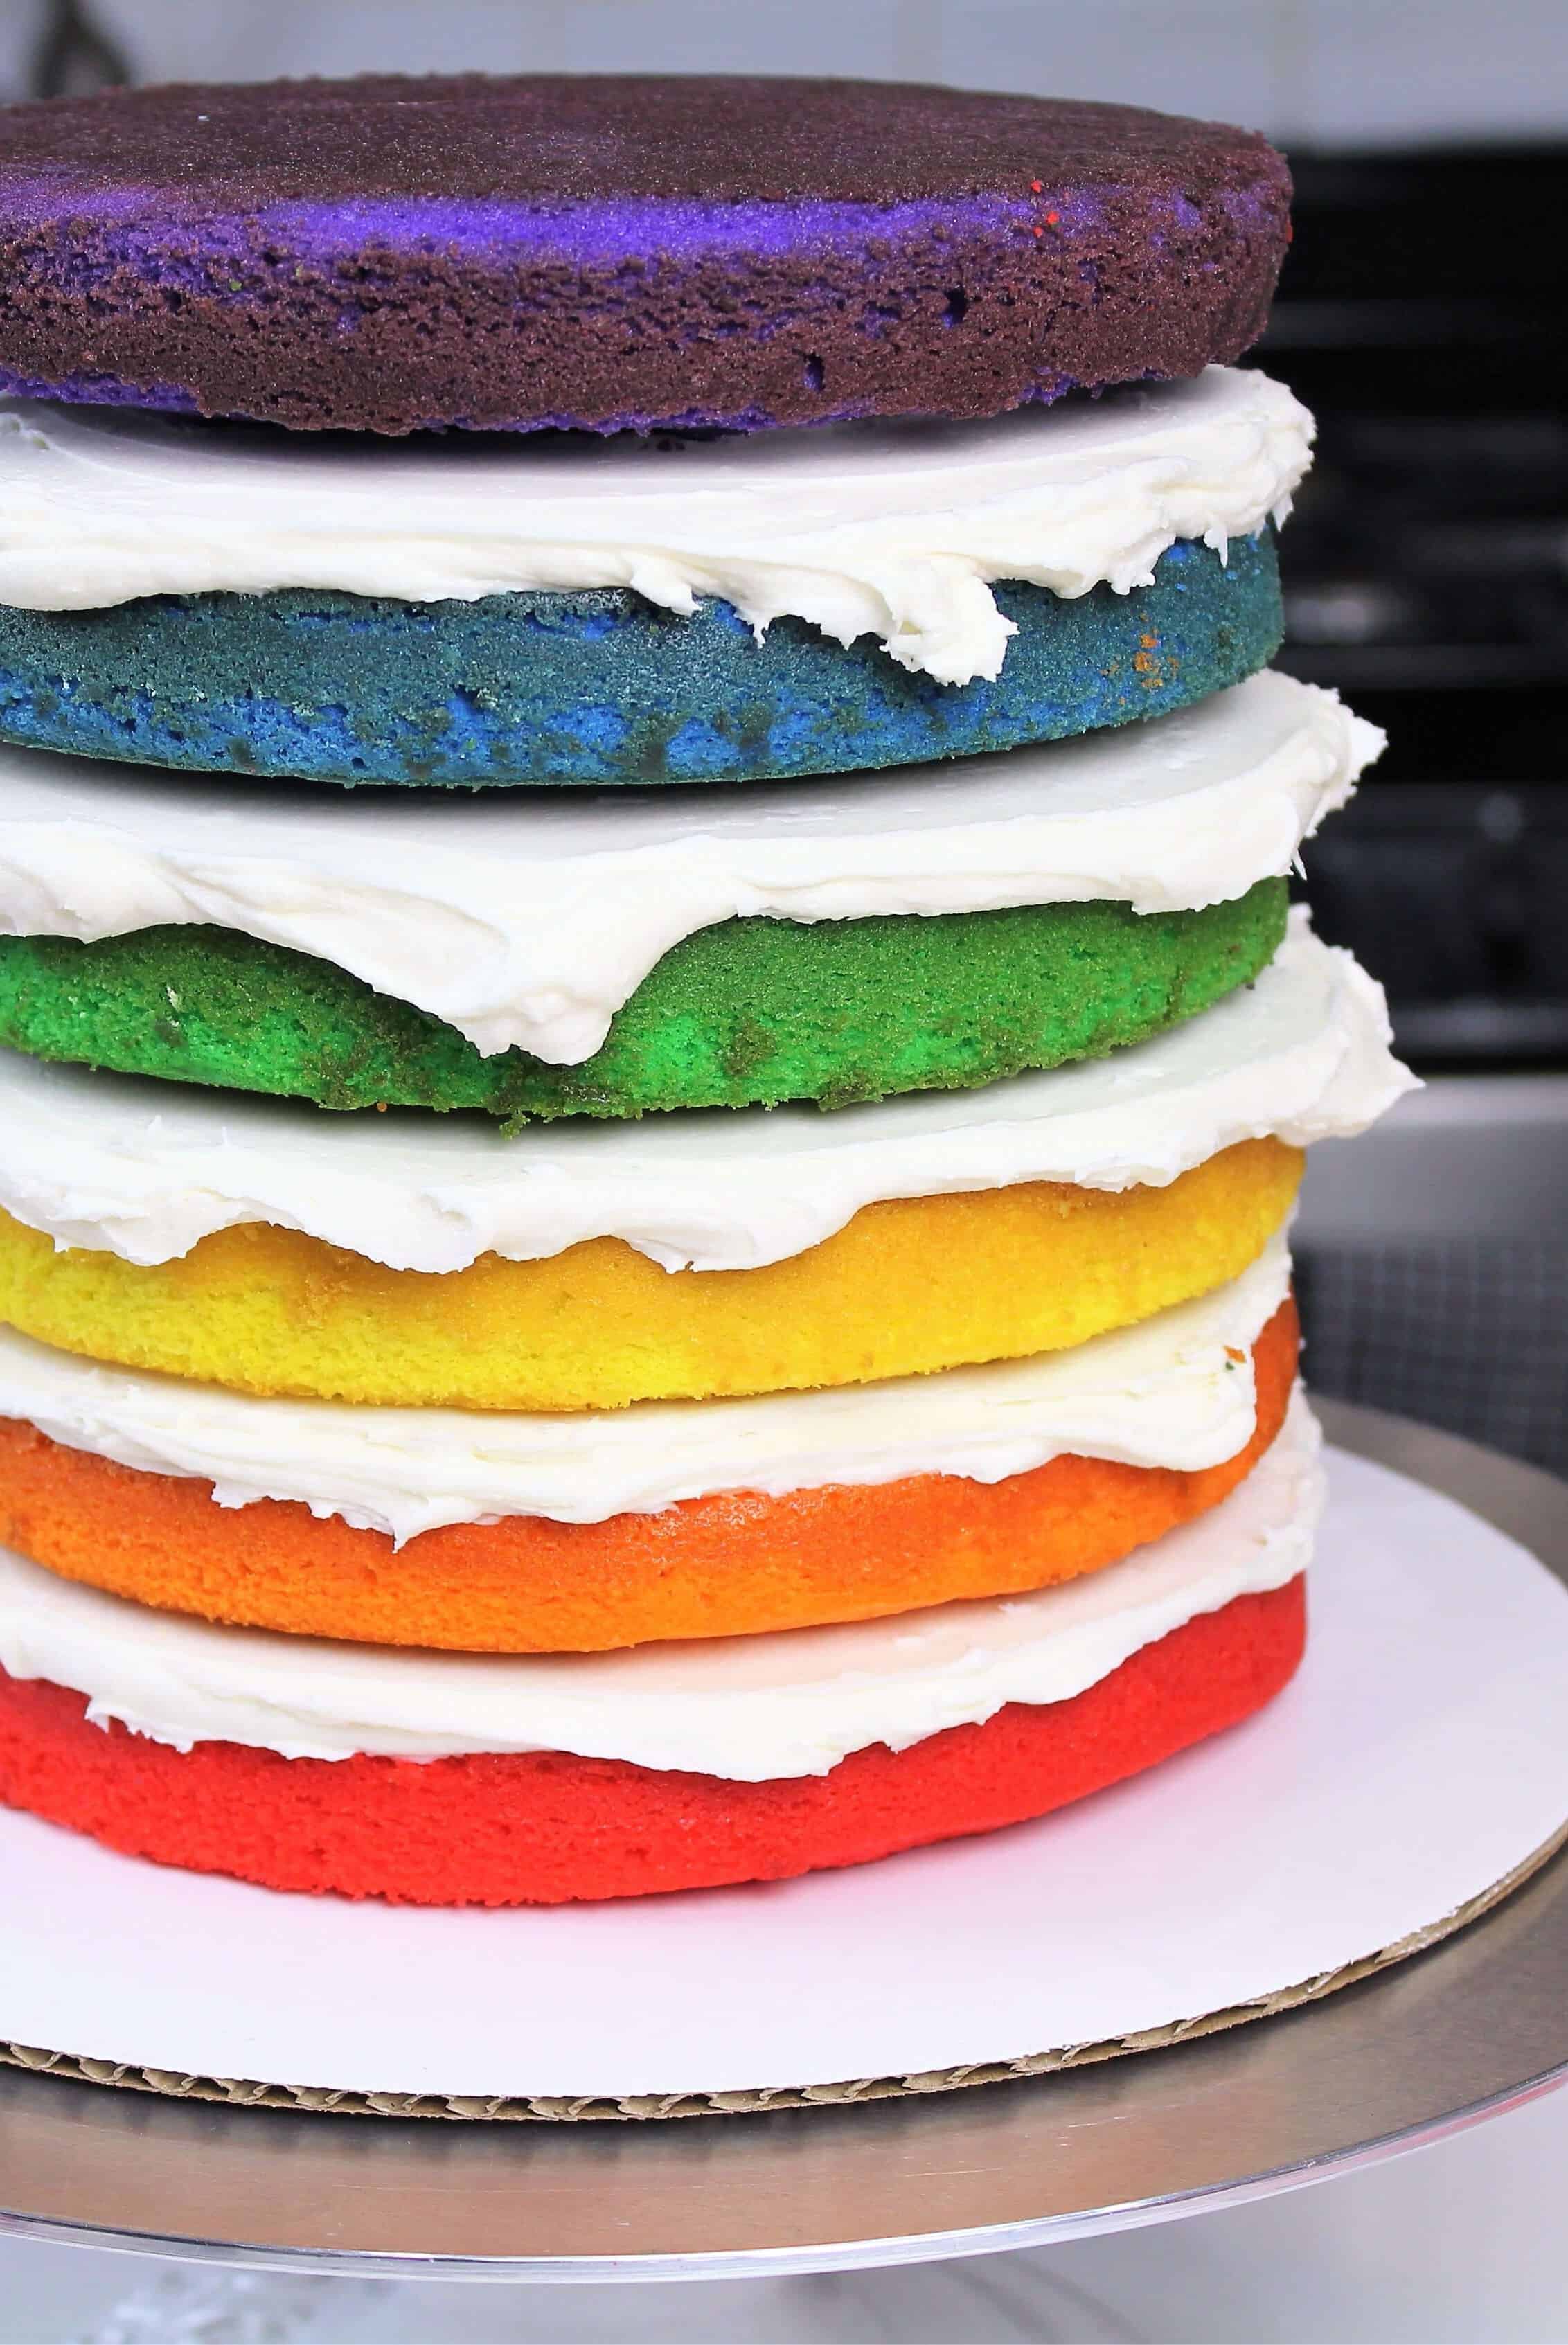 Carve layers of cakes that have been frozen and pre-made